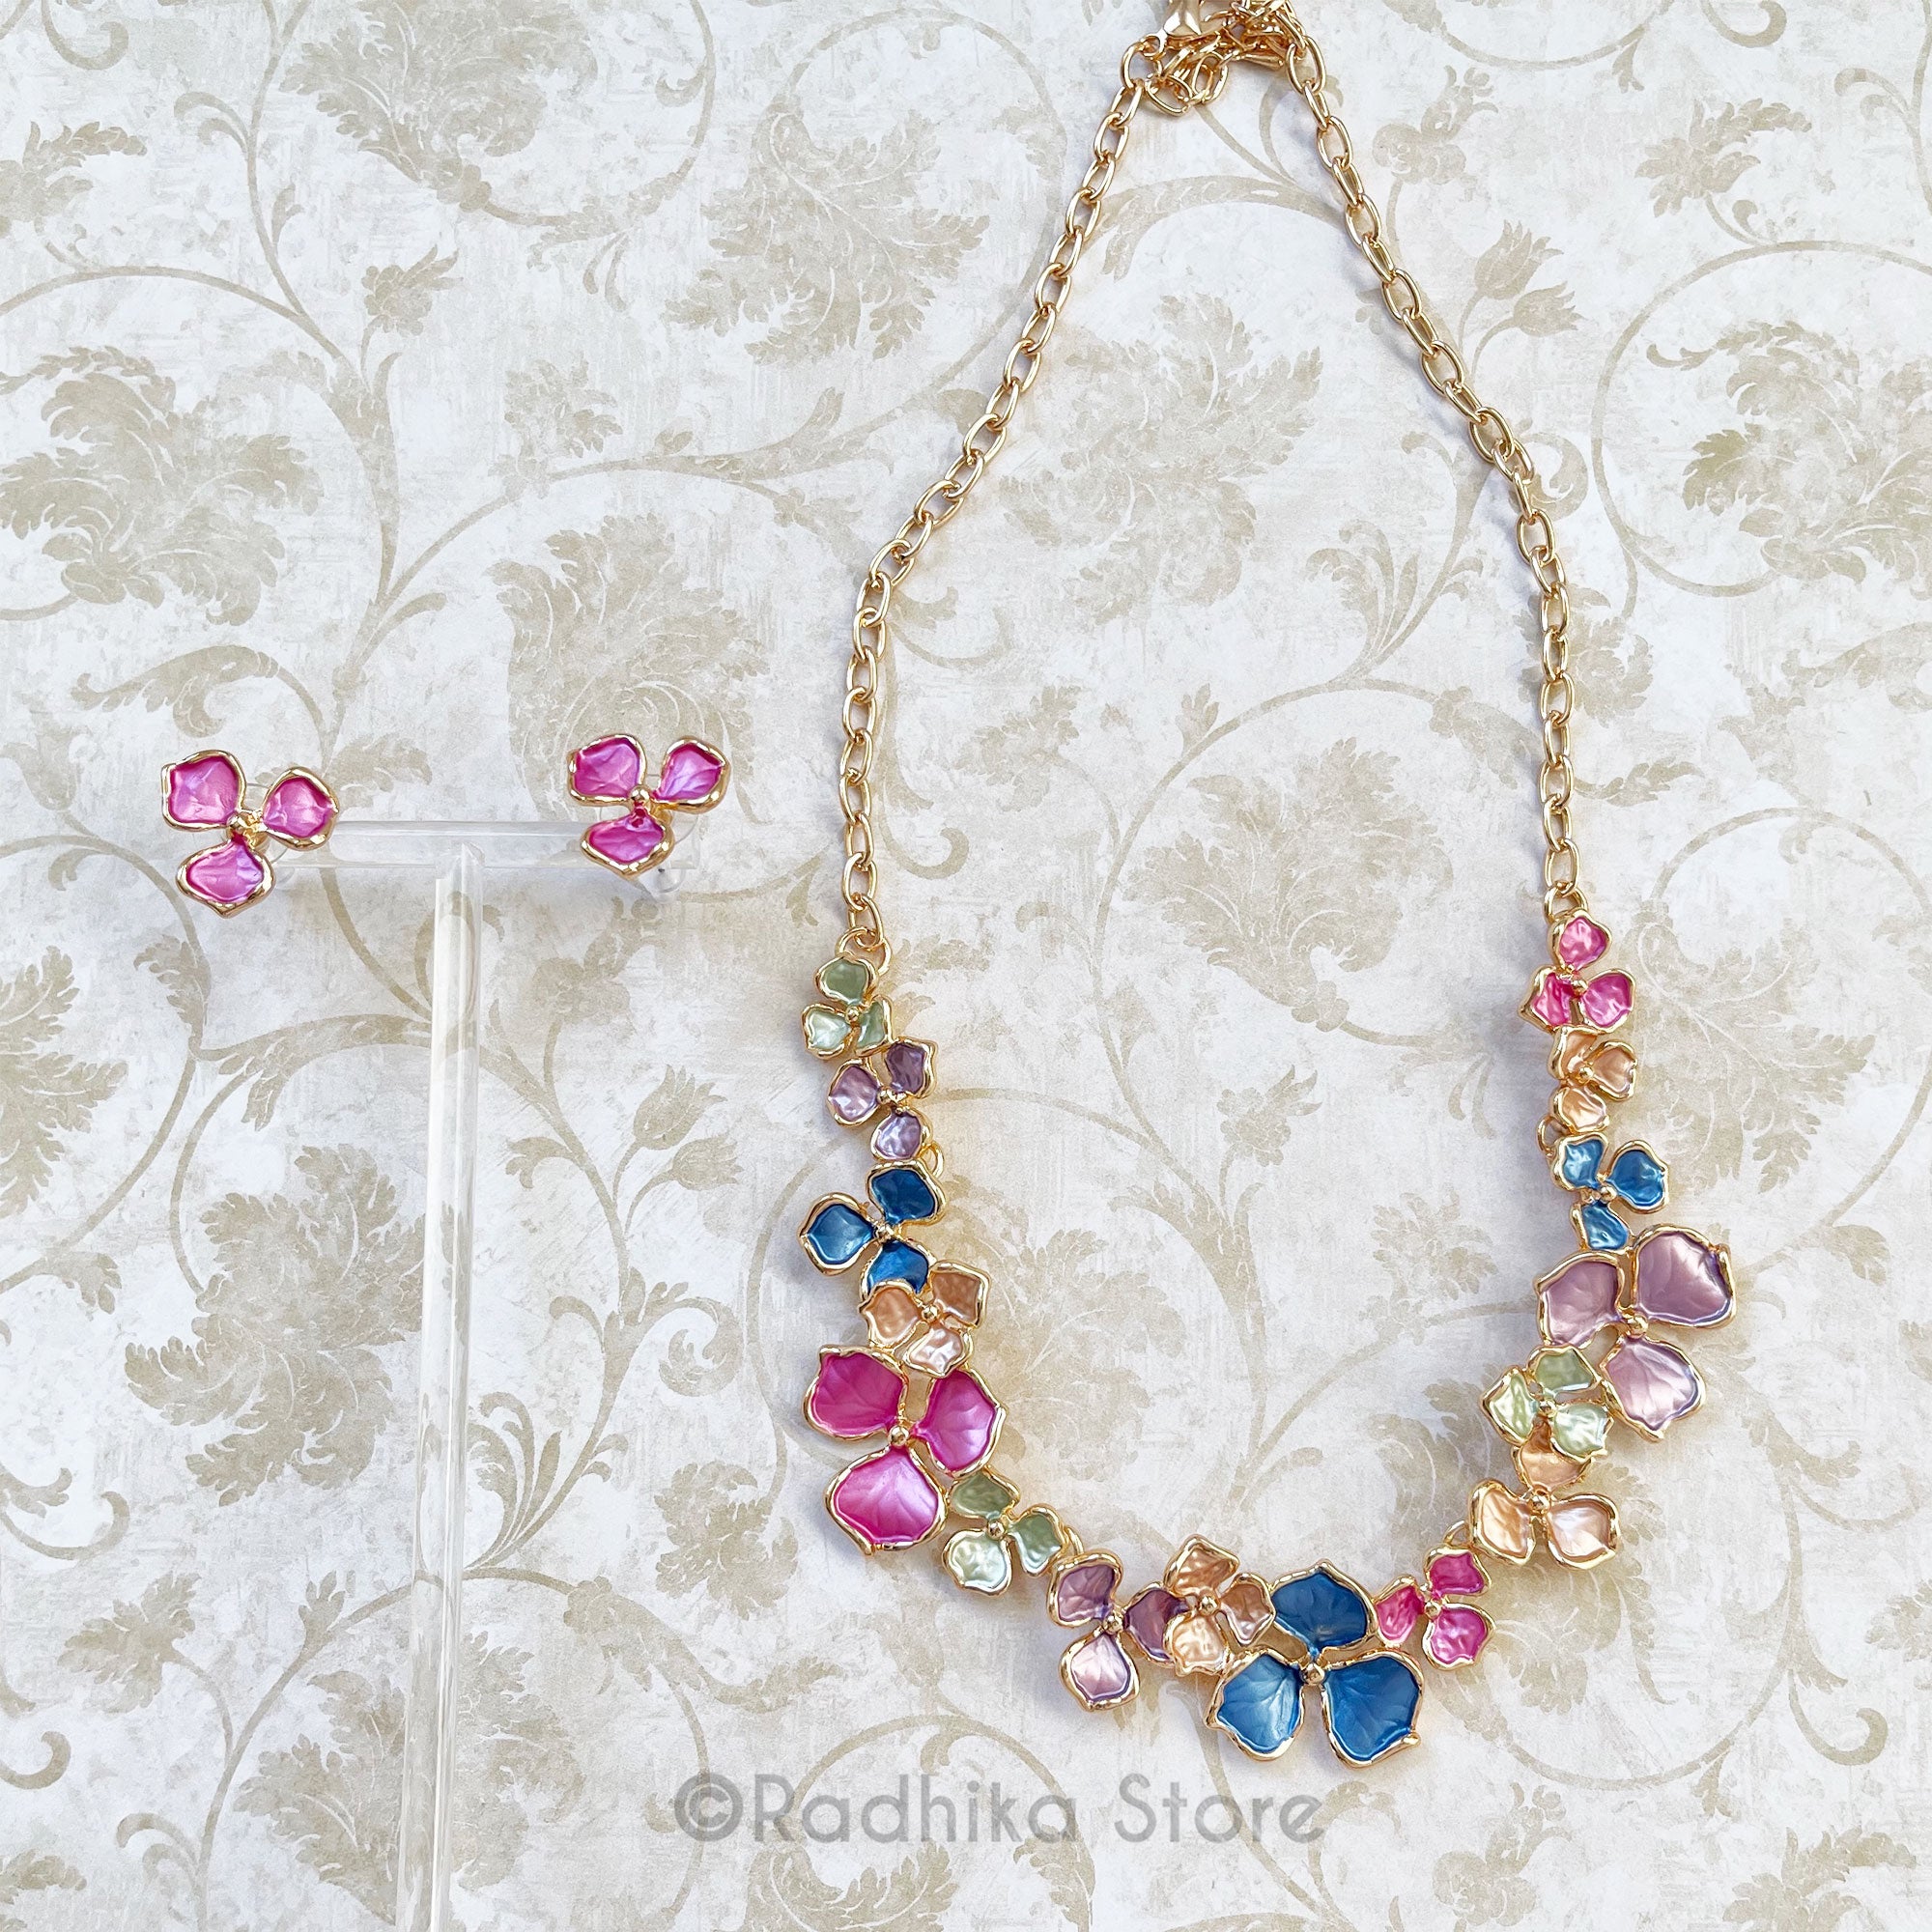 Hydrangea Flowers - Deity Necklace and Earrings Set - With Gold Color